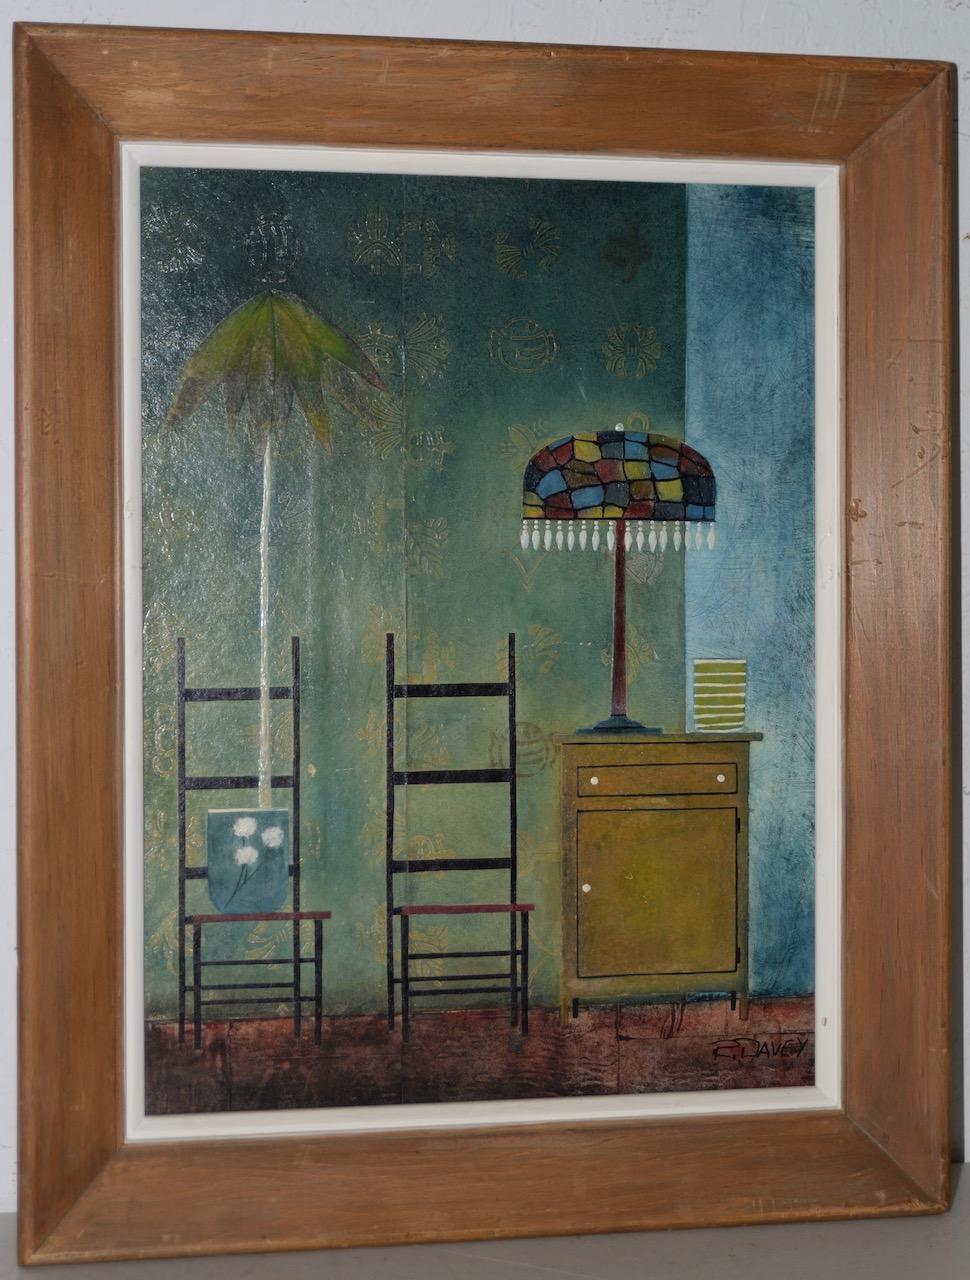 Randall Davey Interior Painting - Robert Davey "Potted Plant" Oil and Collage on Masonite c.1950